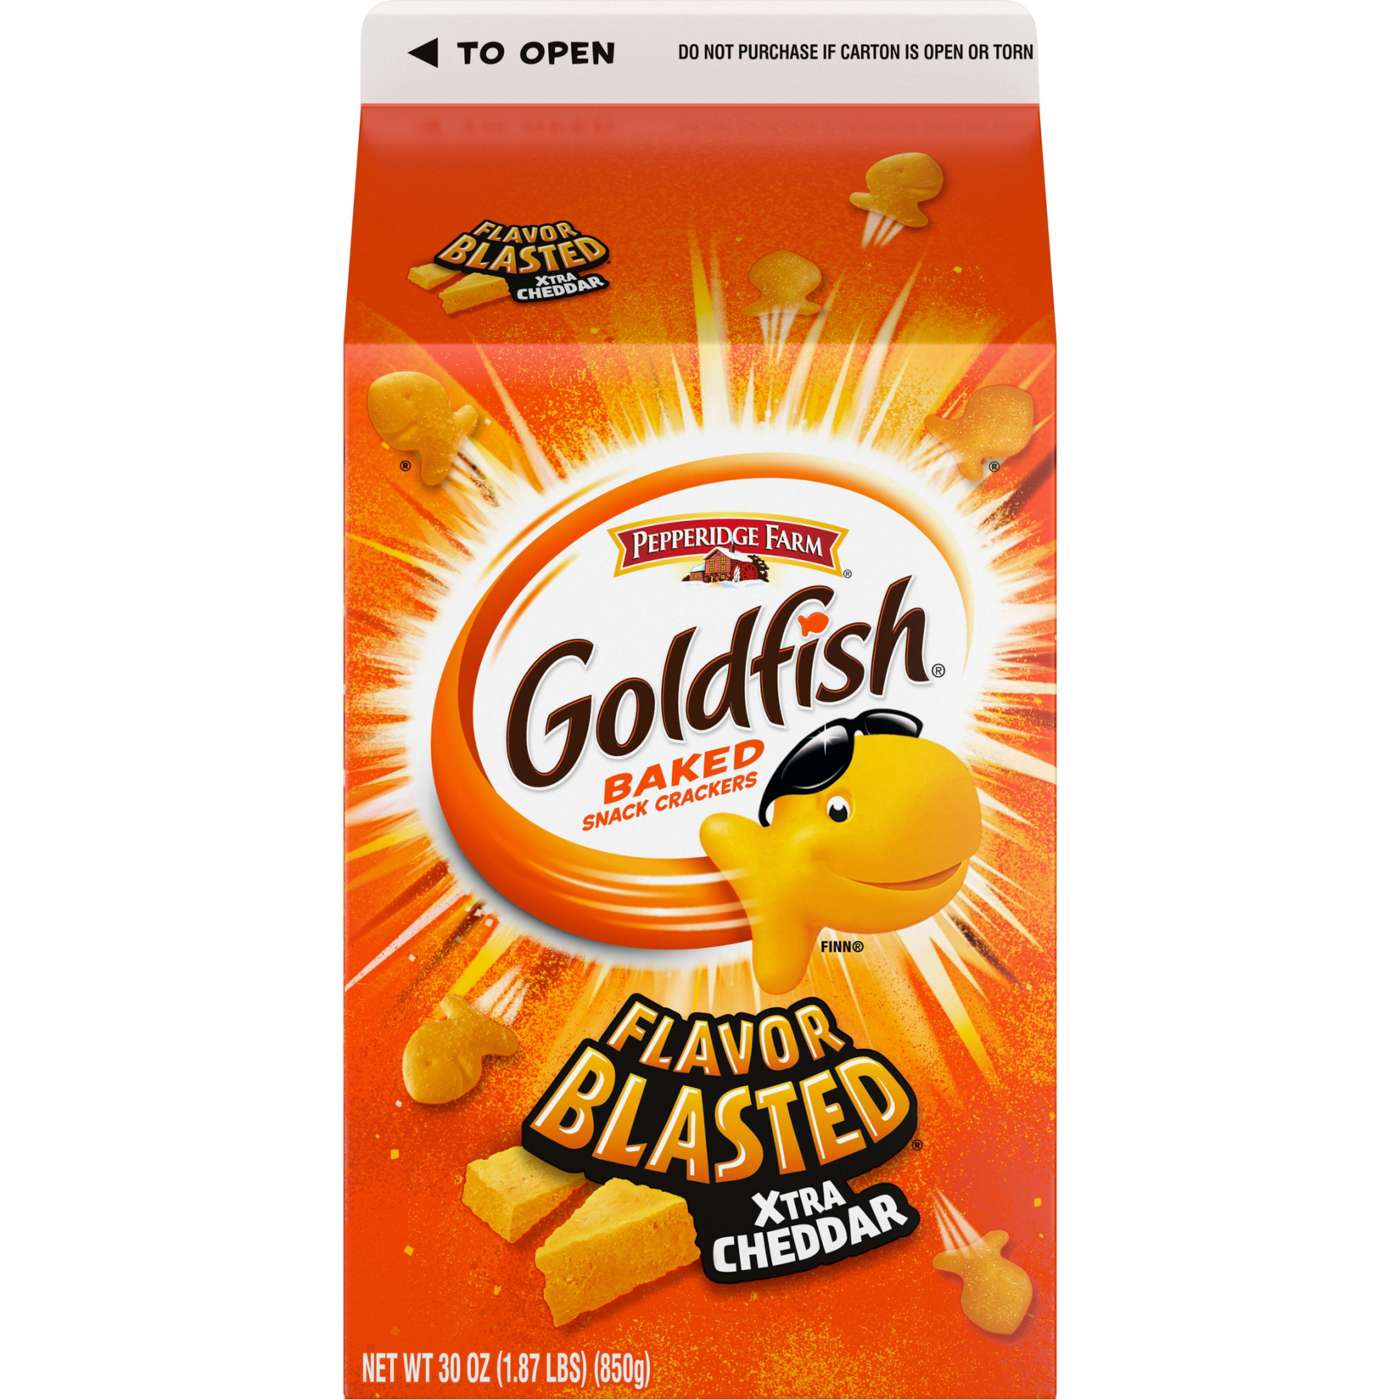 Pepperidge Farm Flavor Blasted Xtra Cheddar Goldfish Baked Snack Crackers; image 1 of 3